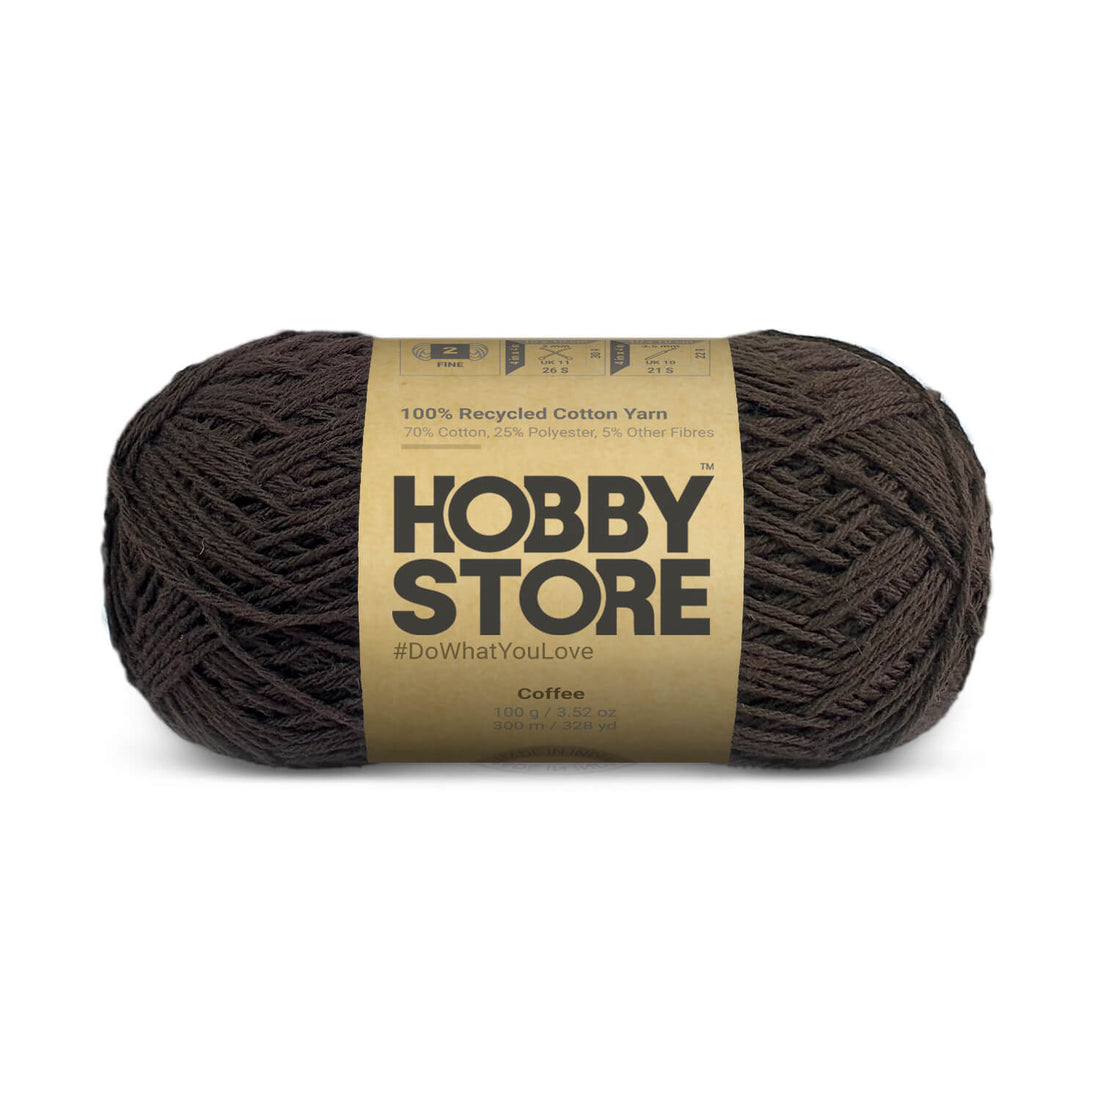 Recycled Cotton Yarn by Hobby Store - Coffee 8410